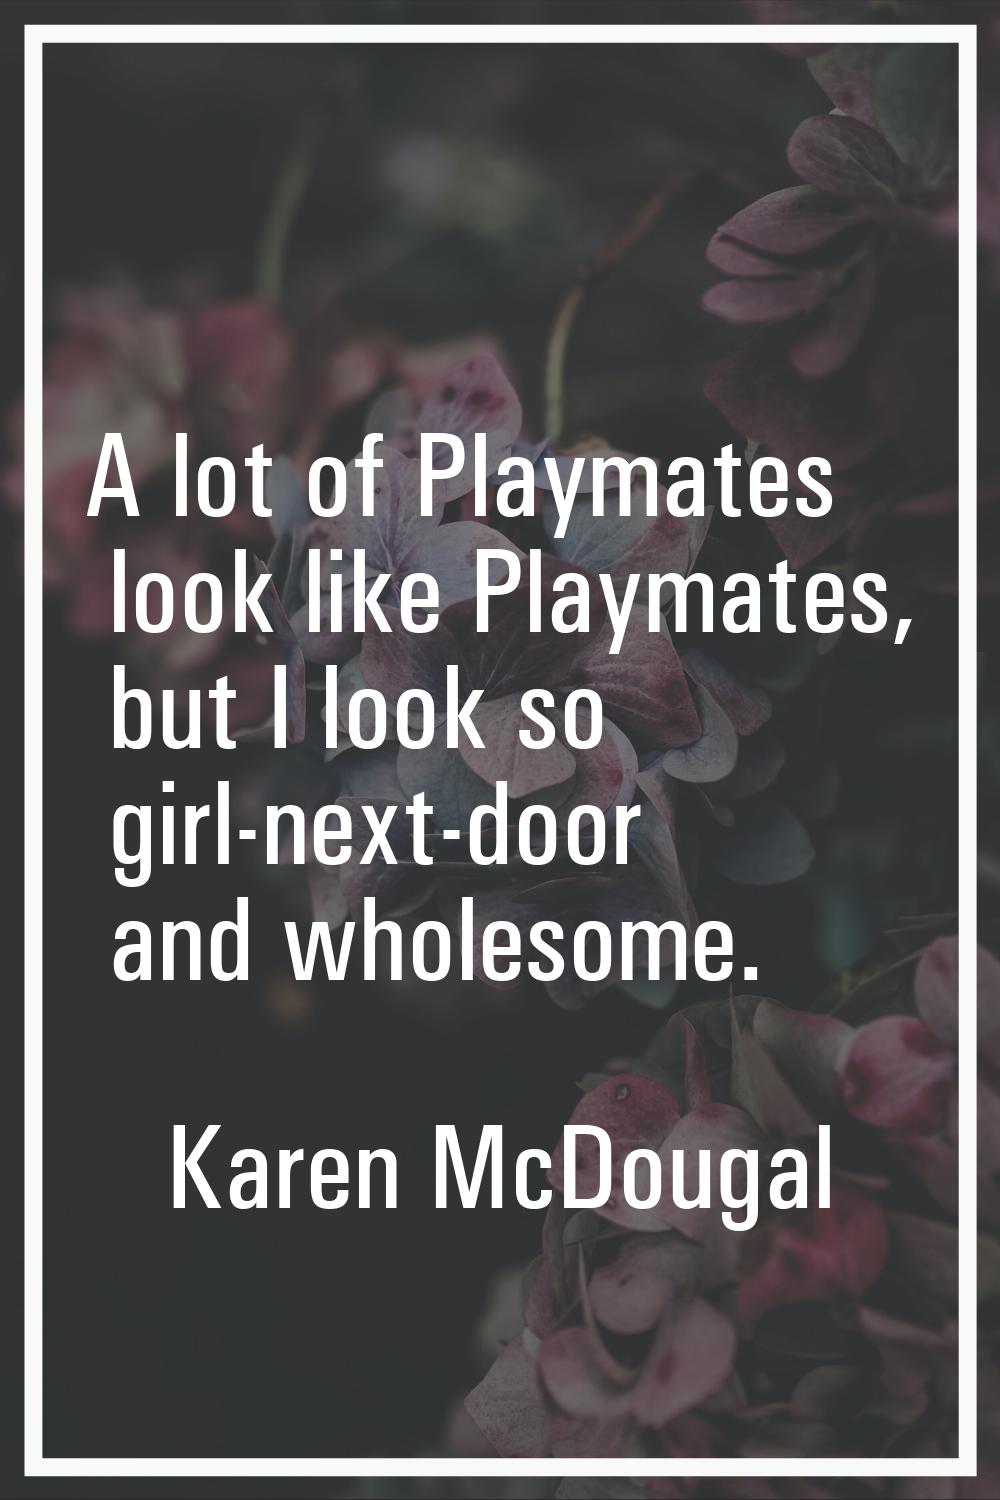 A lot of Playmates look like Playmates, but I look so girl-next-door and wholesome.